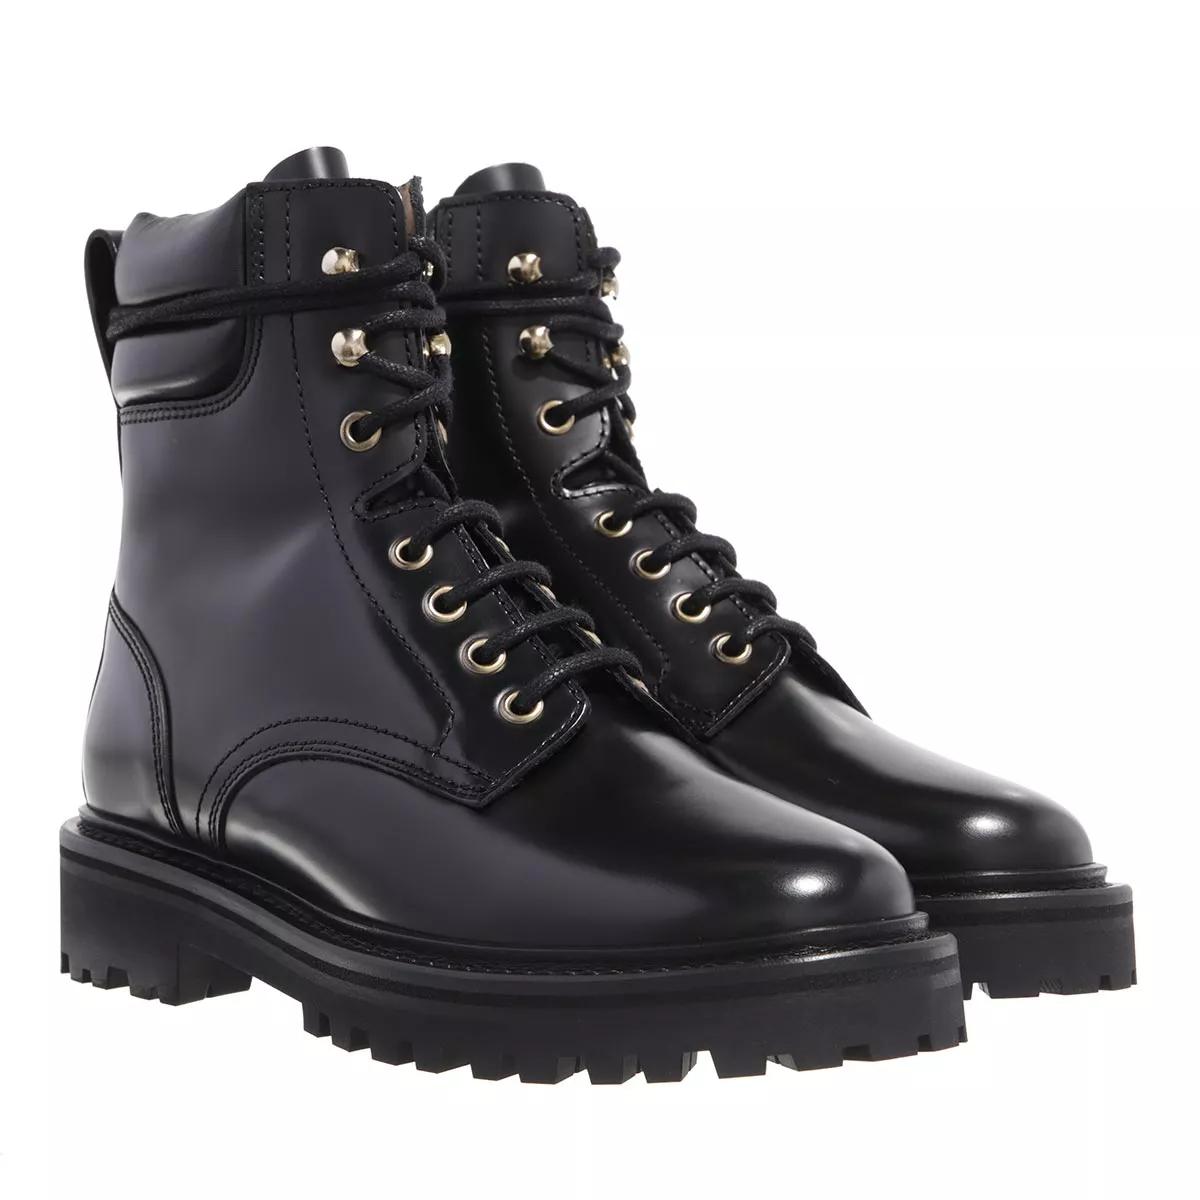 Isabel Marant Campa Boots Leather Black | Lace up Boots | fashionette